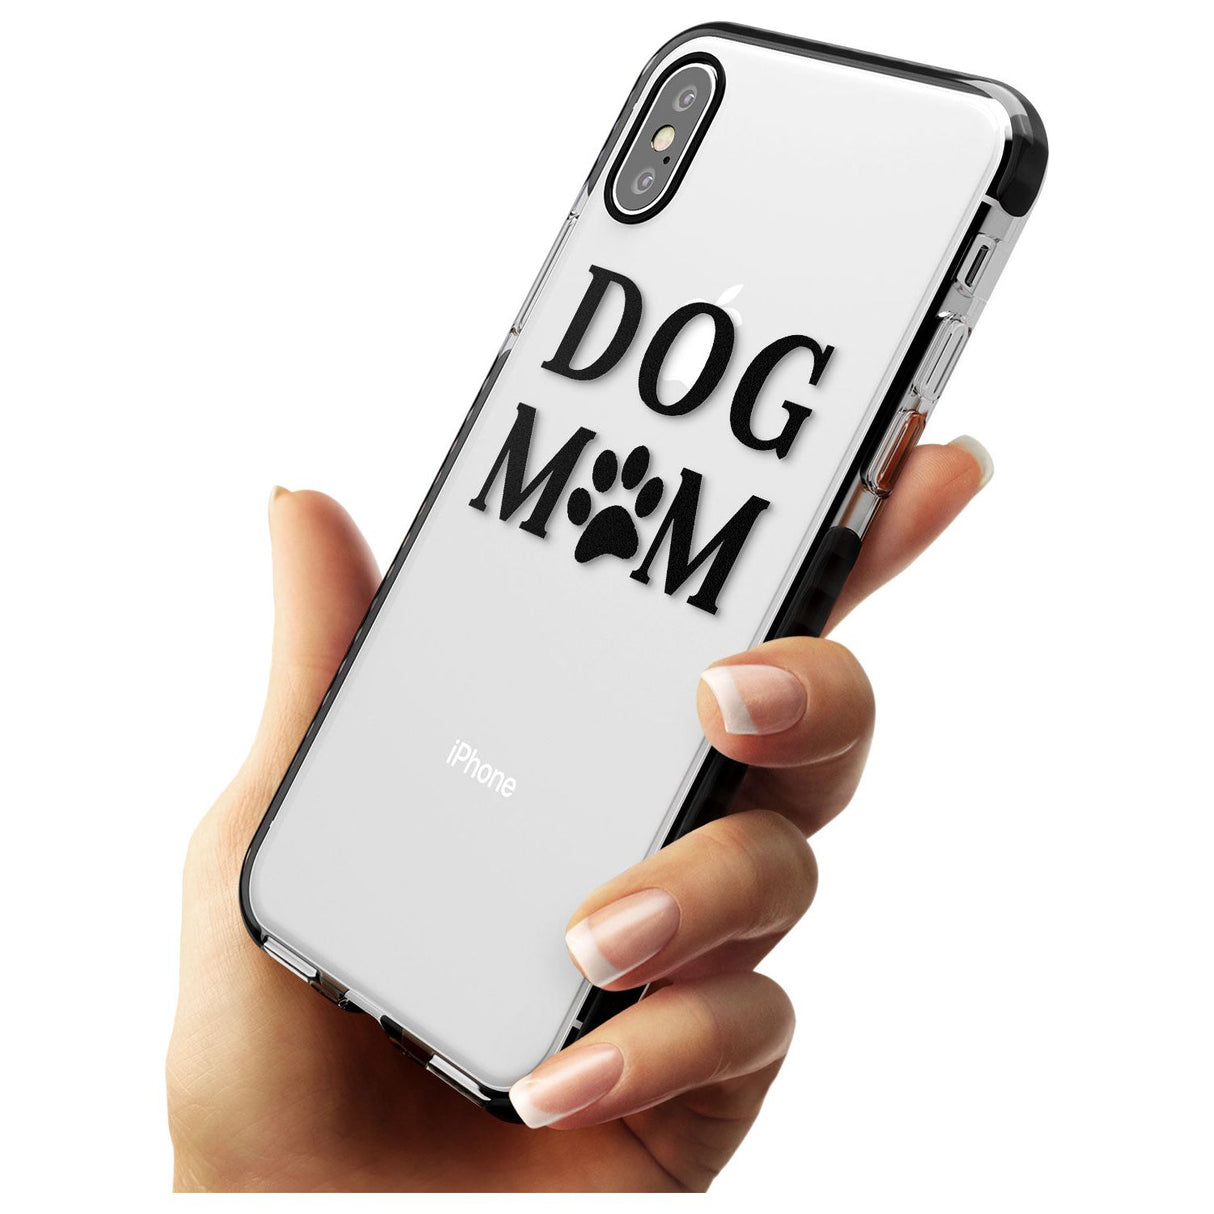 Dog Mom Paw Print Black Impact Phone Case for iPhone X XS Max XR